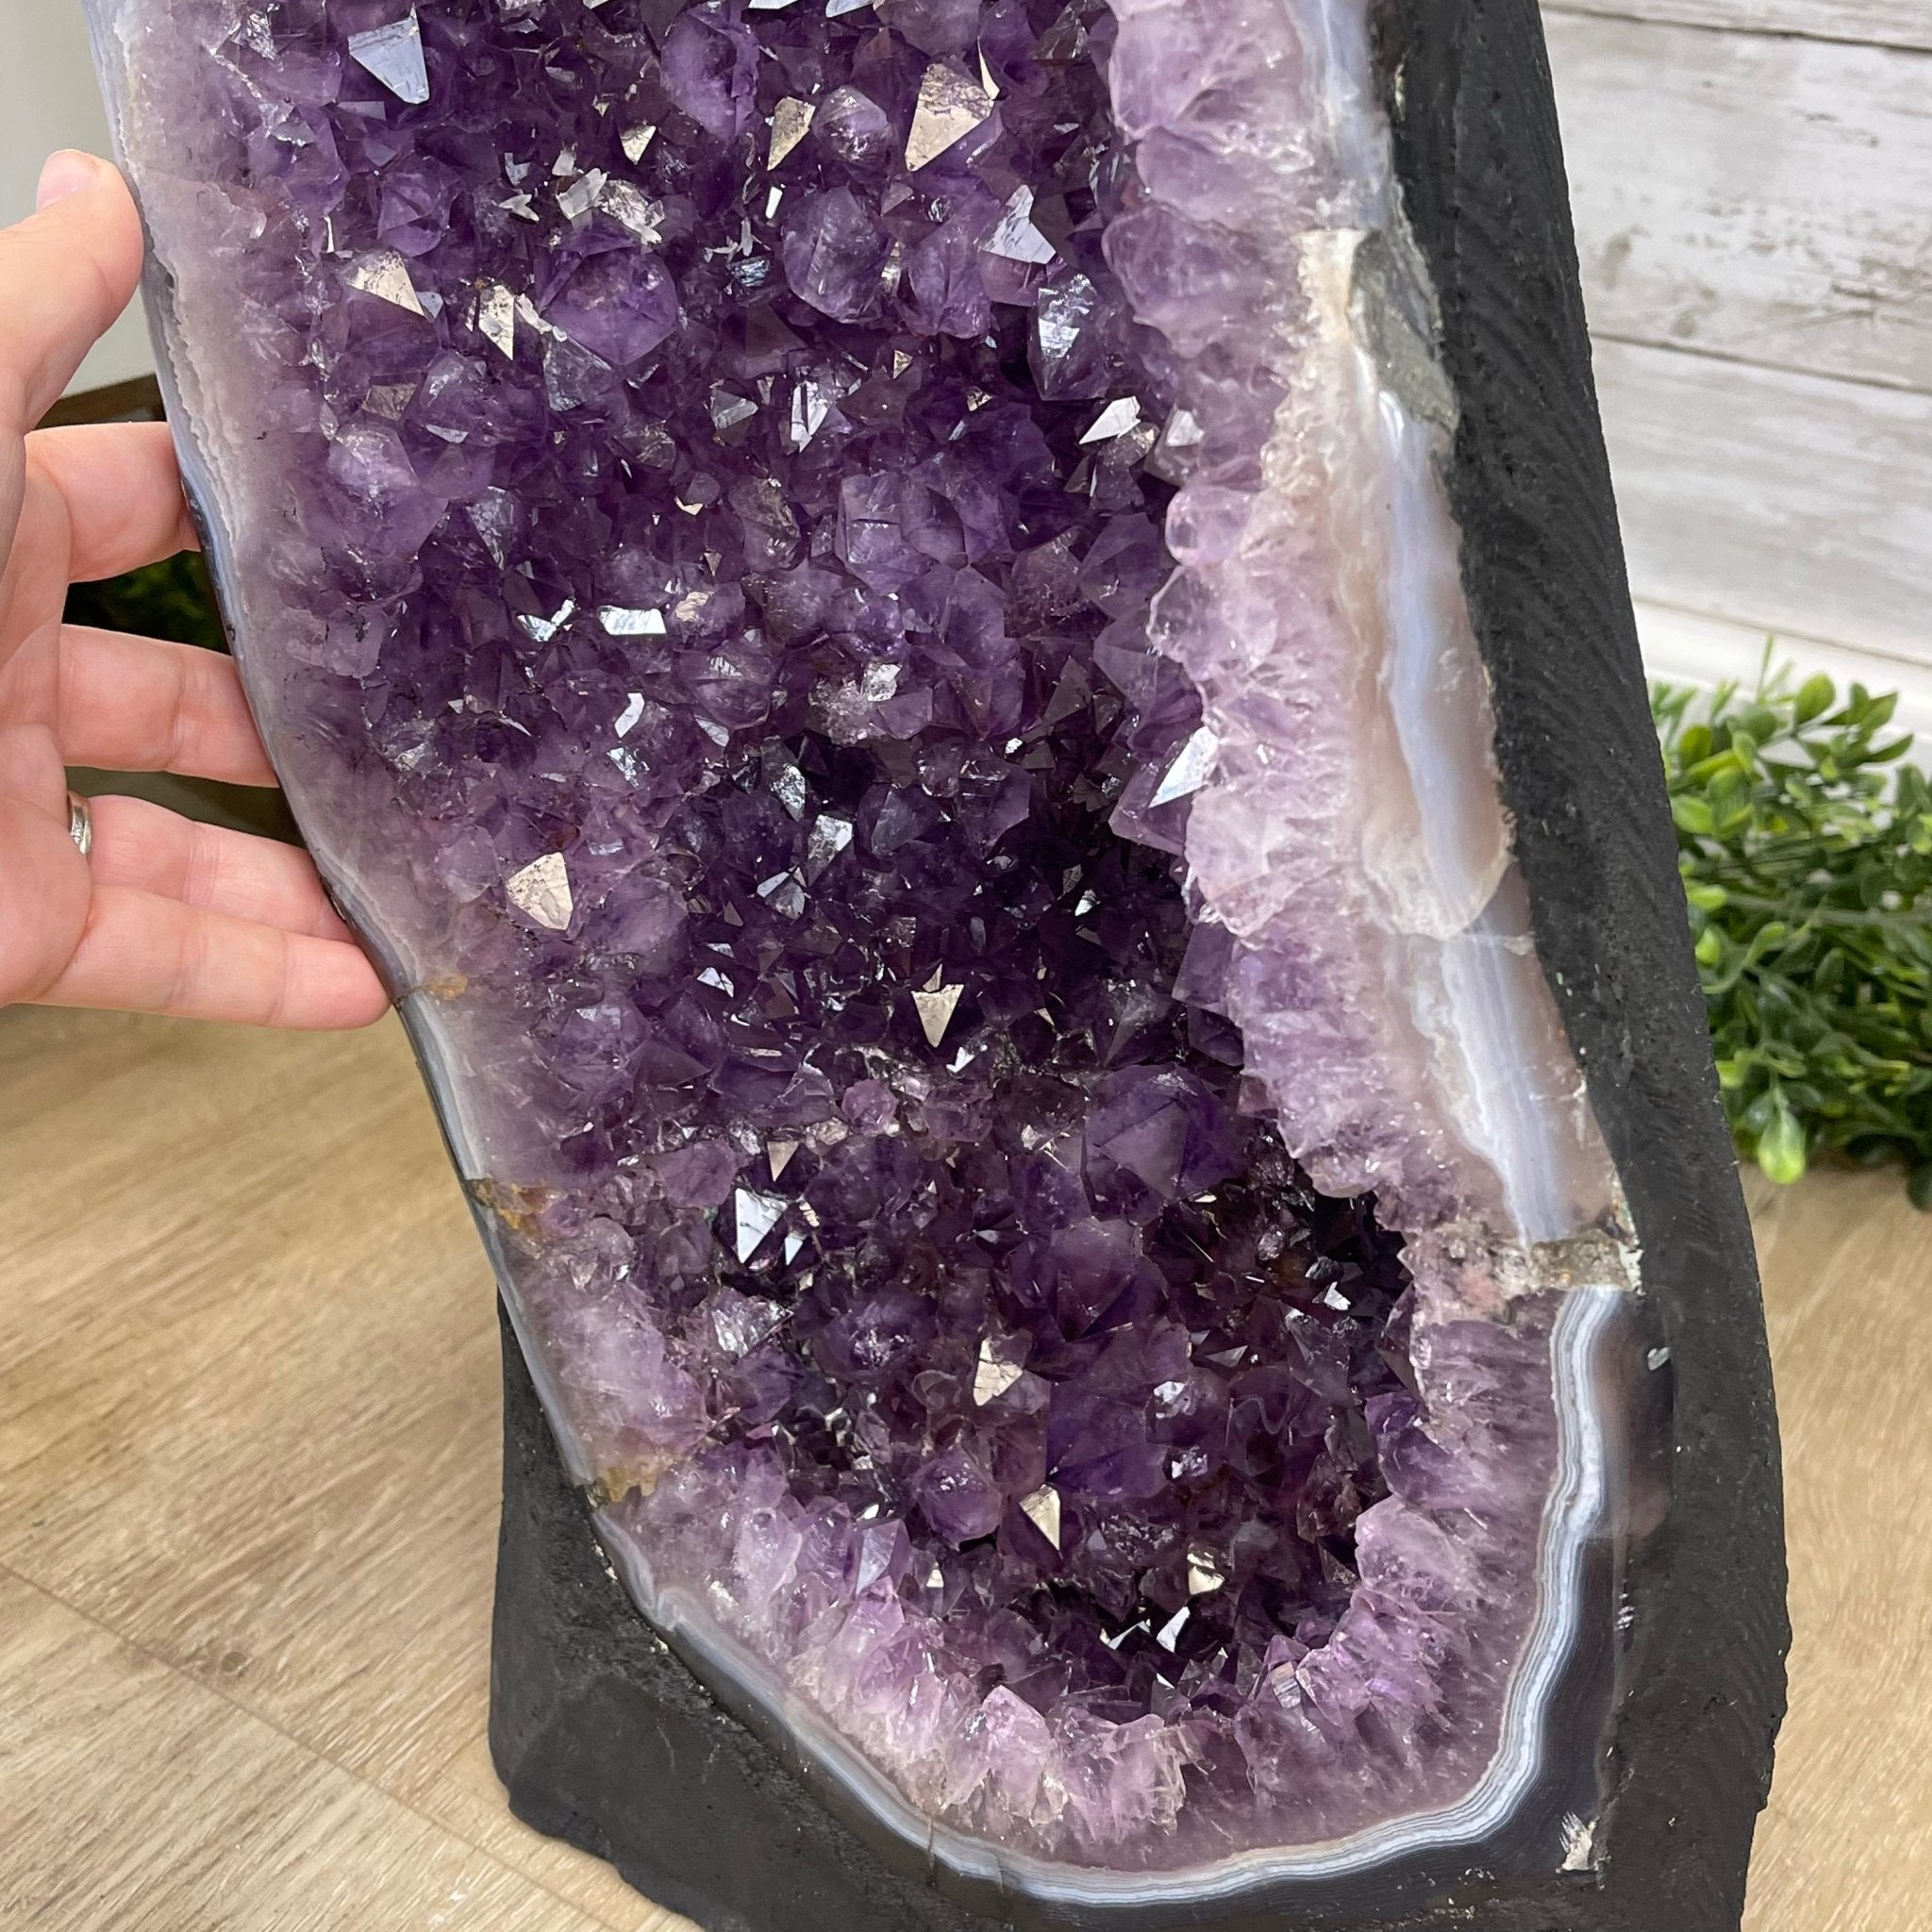 Large Standard Plus Quality Brazilian Amethyst Cathedral, 108 lbs & 55.8" Tall #5601-1202 by Brazil Gems - Brazil GemsBrazil GemsLarge Standard Plus Quality Brazilian Amethyst Cathedral, 108 lbs & 55.8" Tall #5601-1202 by Brazil GemsCathedrals5601-1202